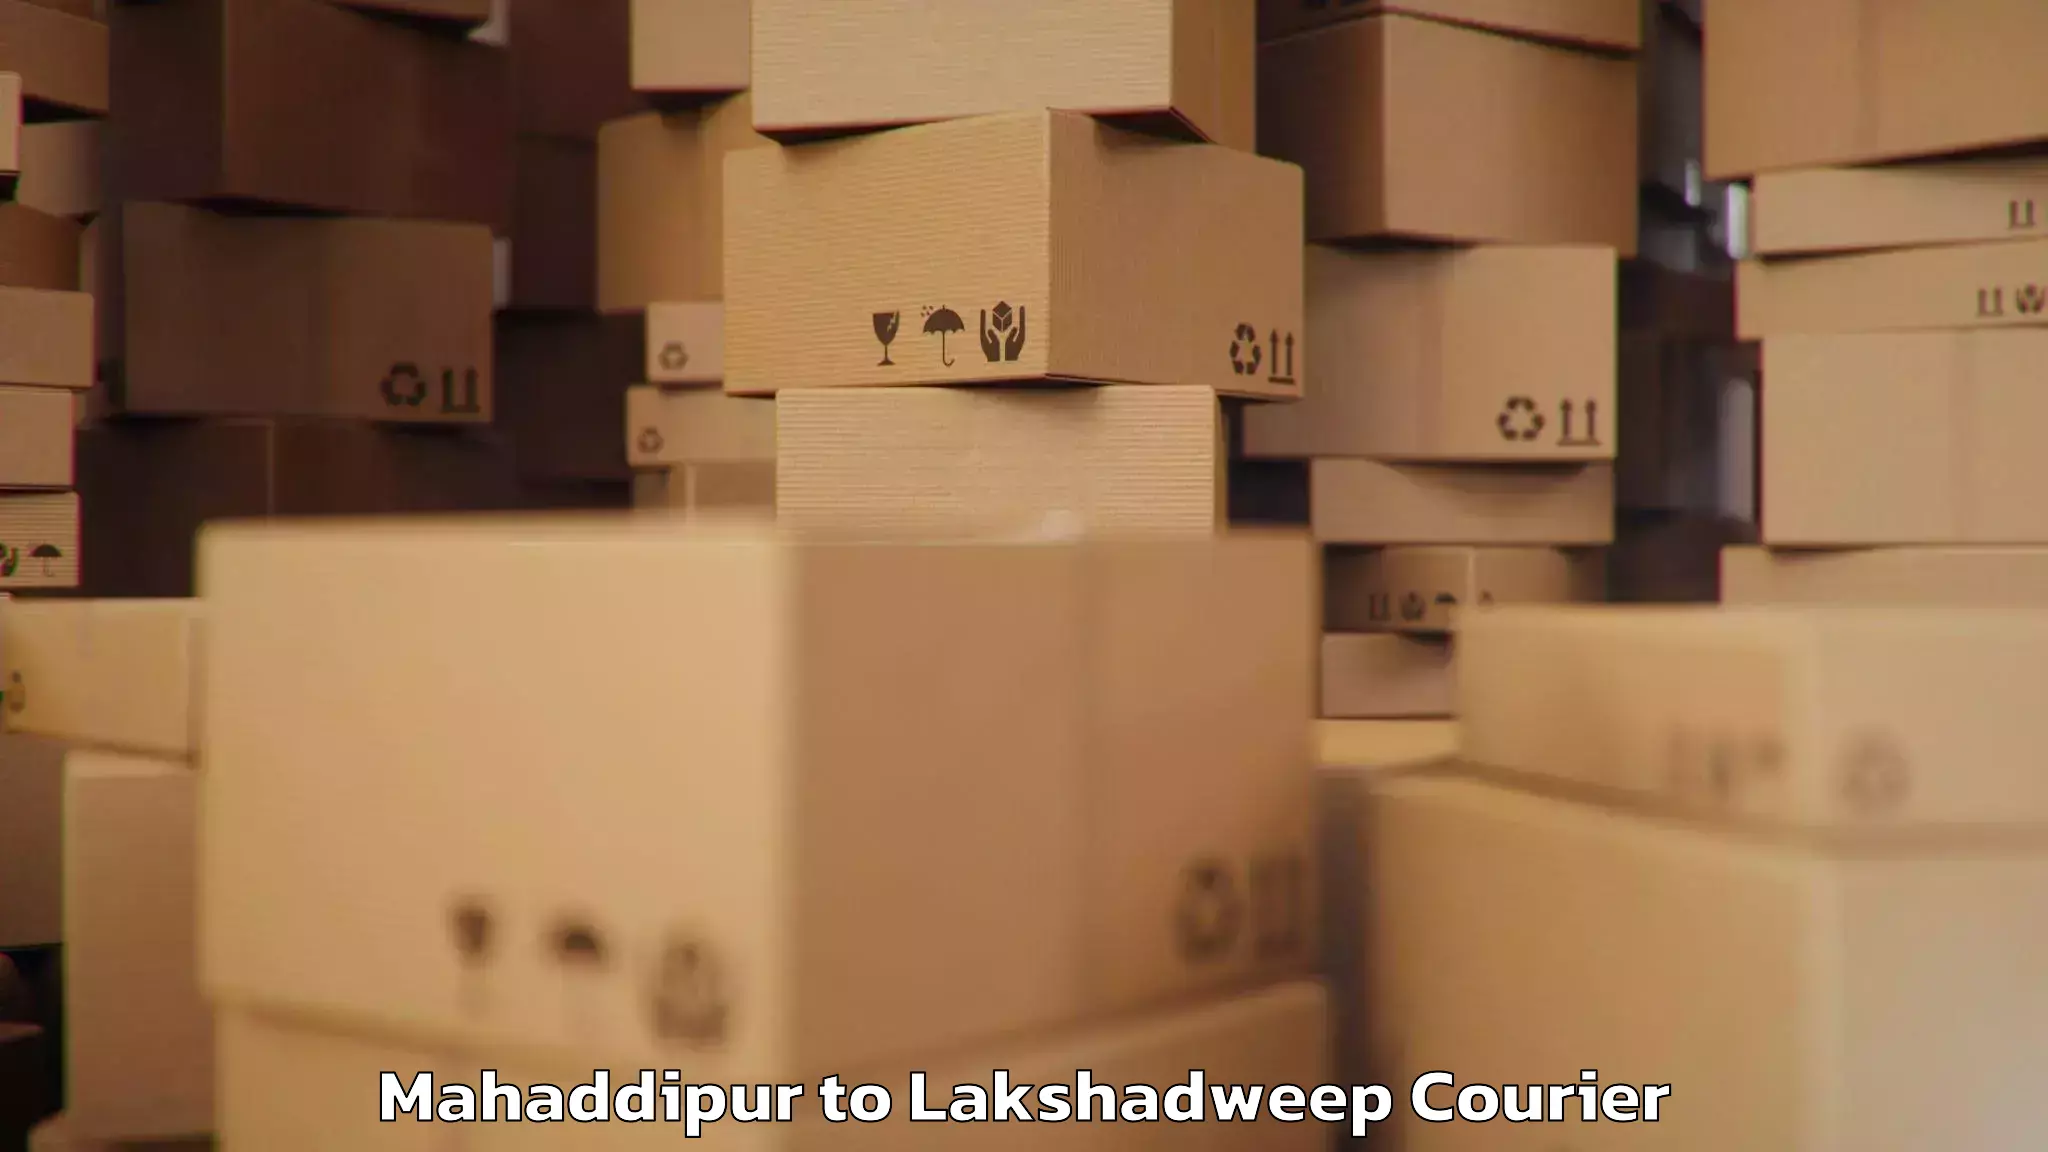 Luggage delivery system Mahaddipur to Lakshadweep